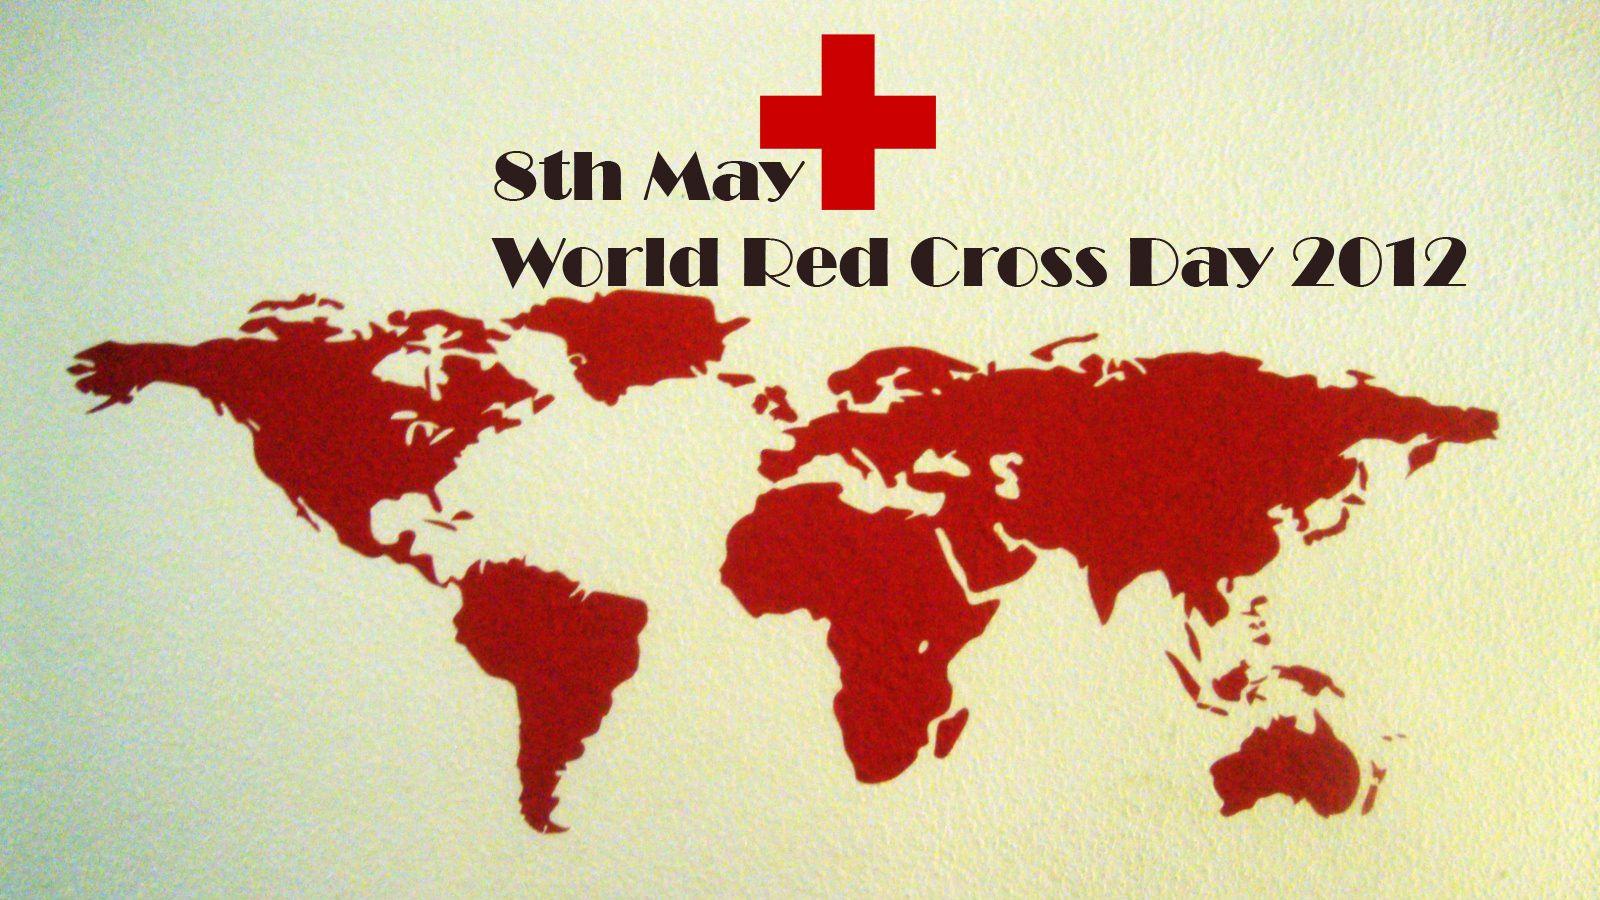 PicturePool: International Red Cross Day Wallpaper. Redcross day